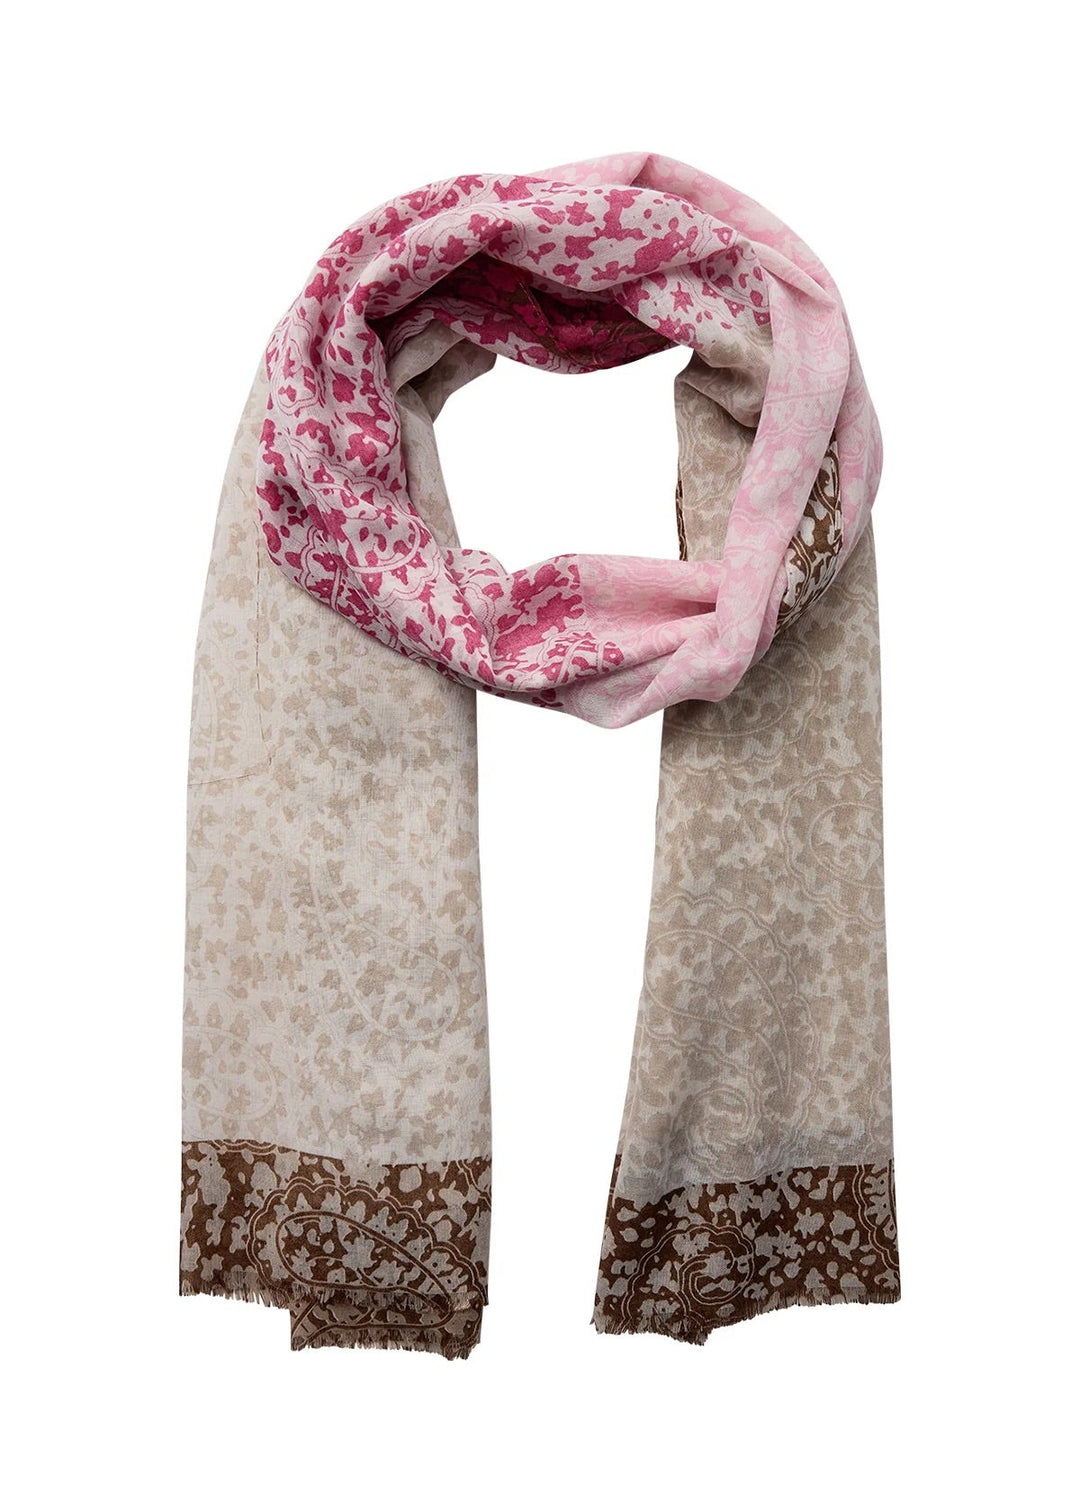 Soya Concept Denezia Scarf In Pink Multi - Crabtree Cottage